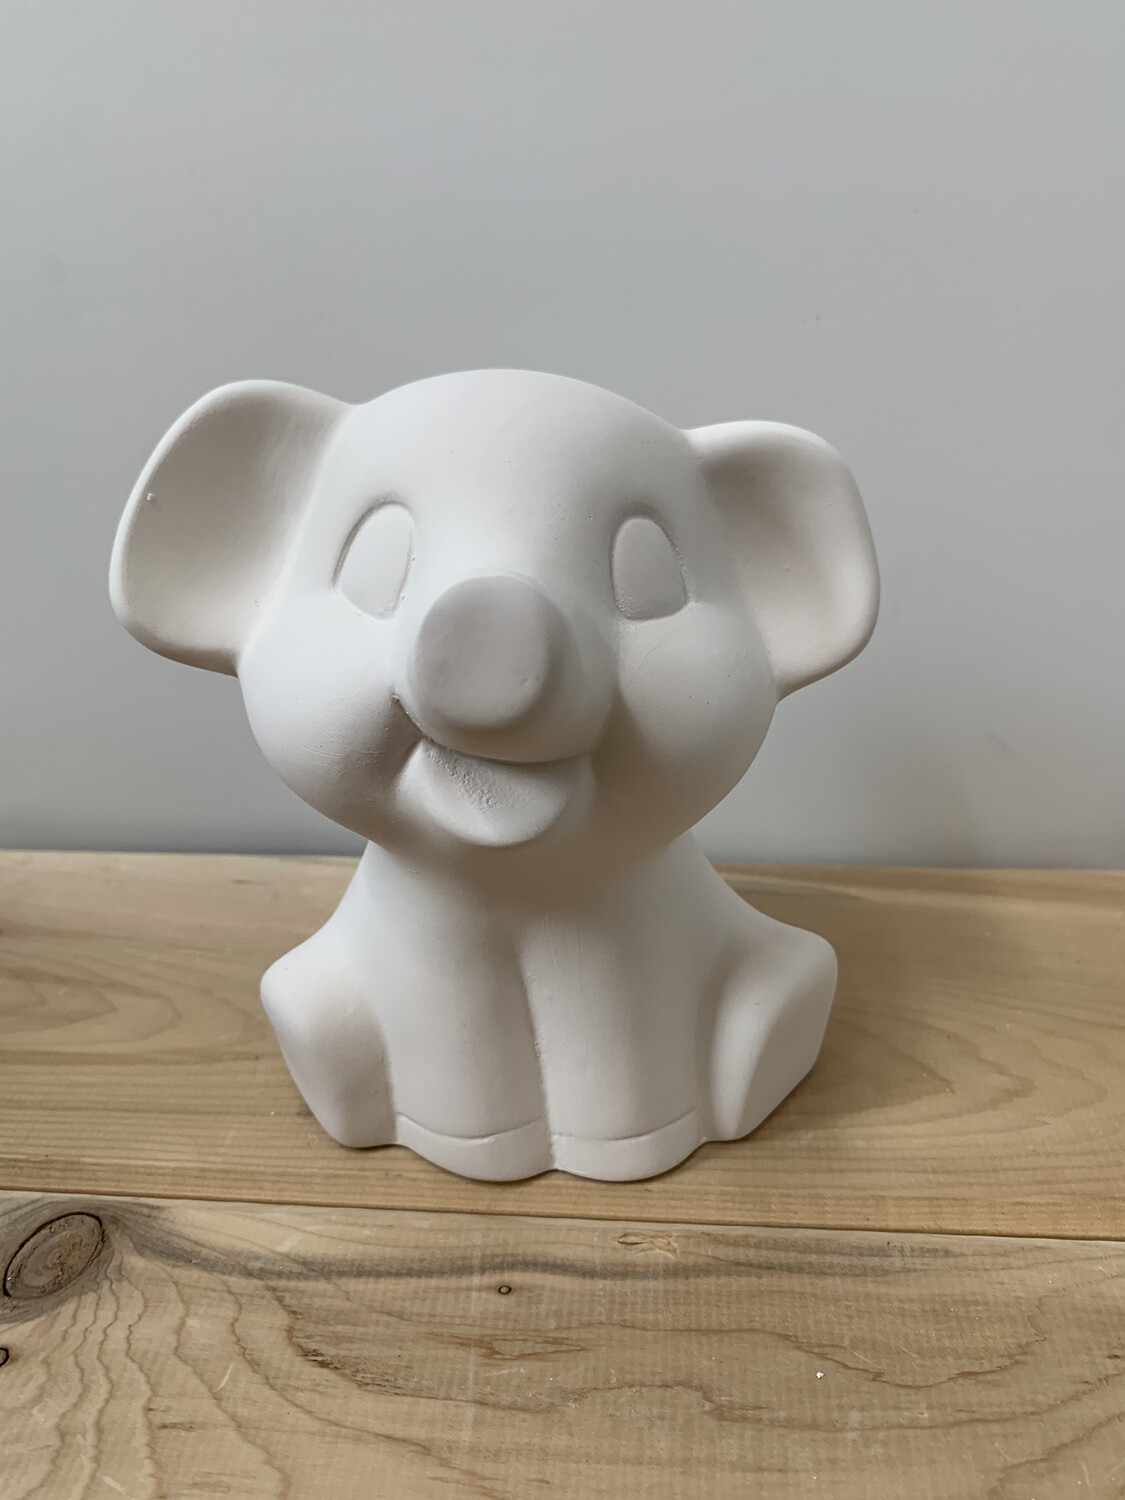 Paint Your Own Pottery - Ceramic
Elephant Figurine Painting Kit